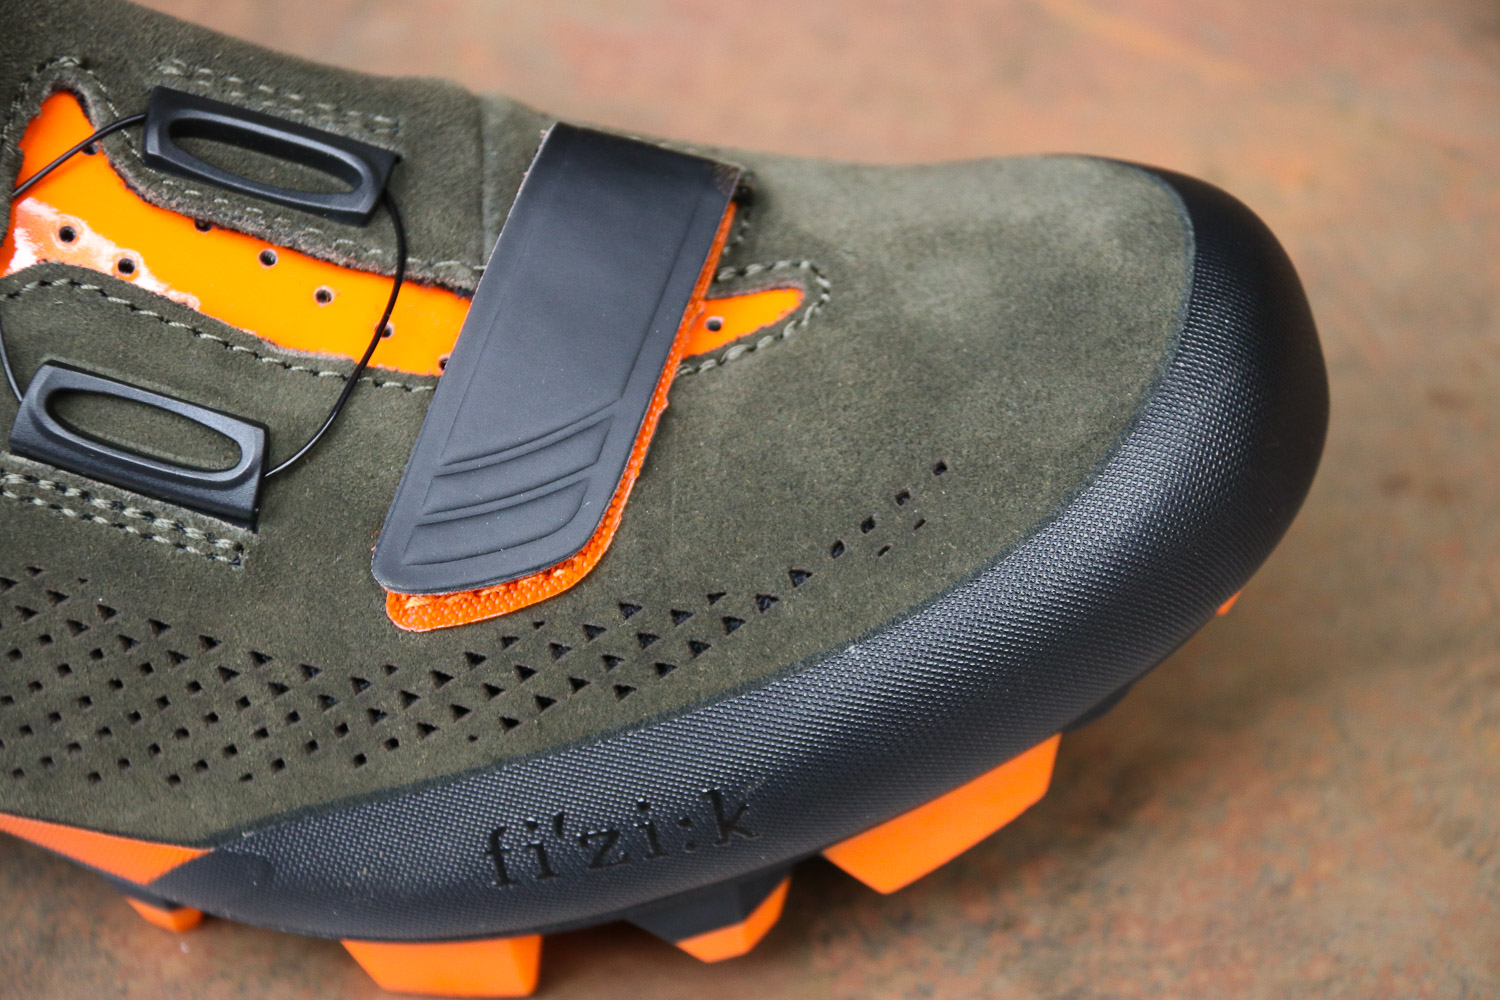 Fizik 2018 First Look: Updated shoes and all-new saddle options | road.cc